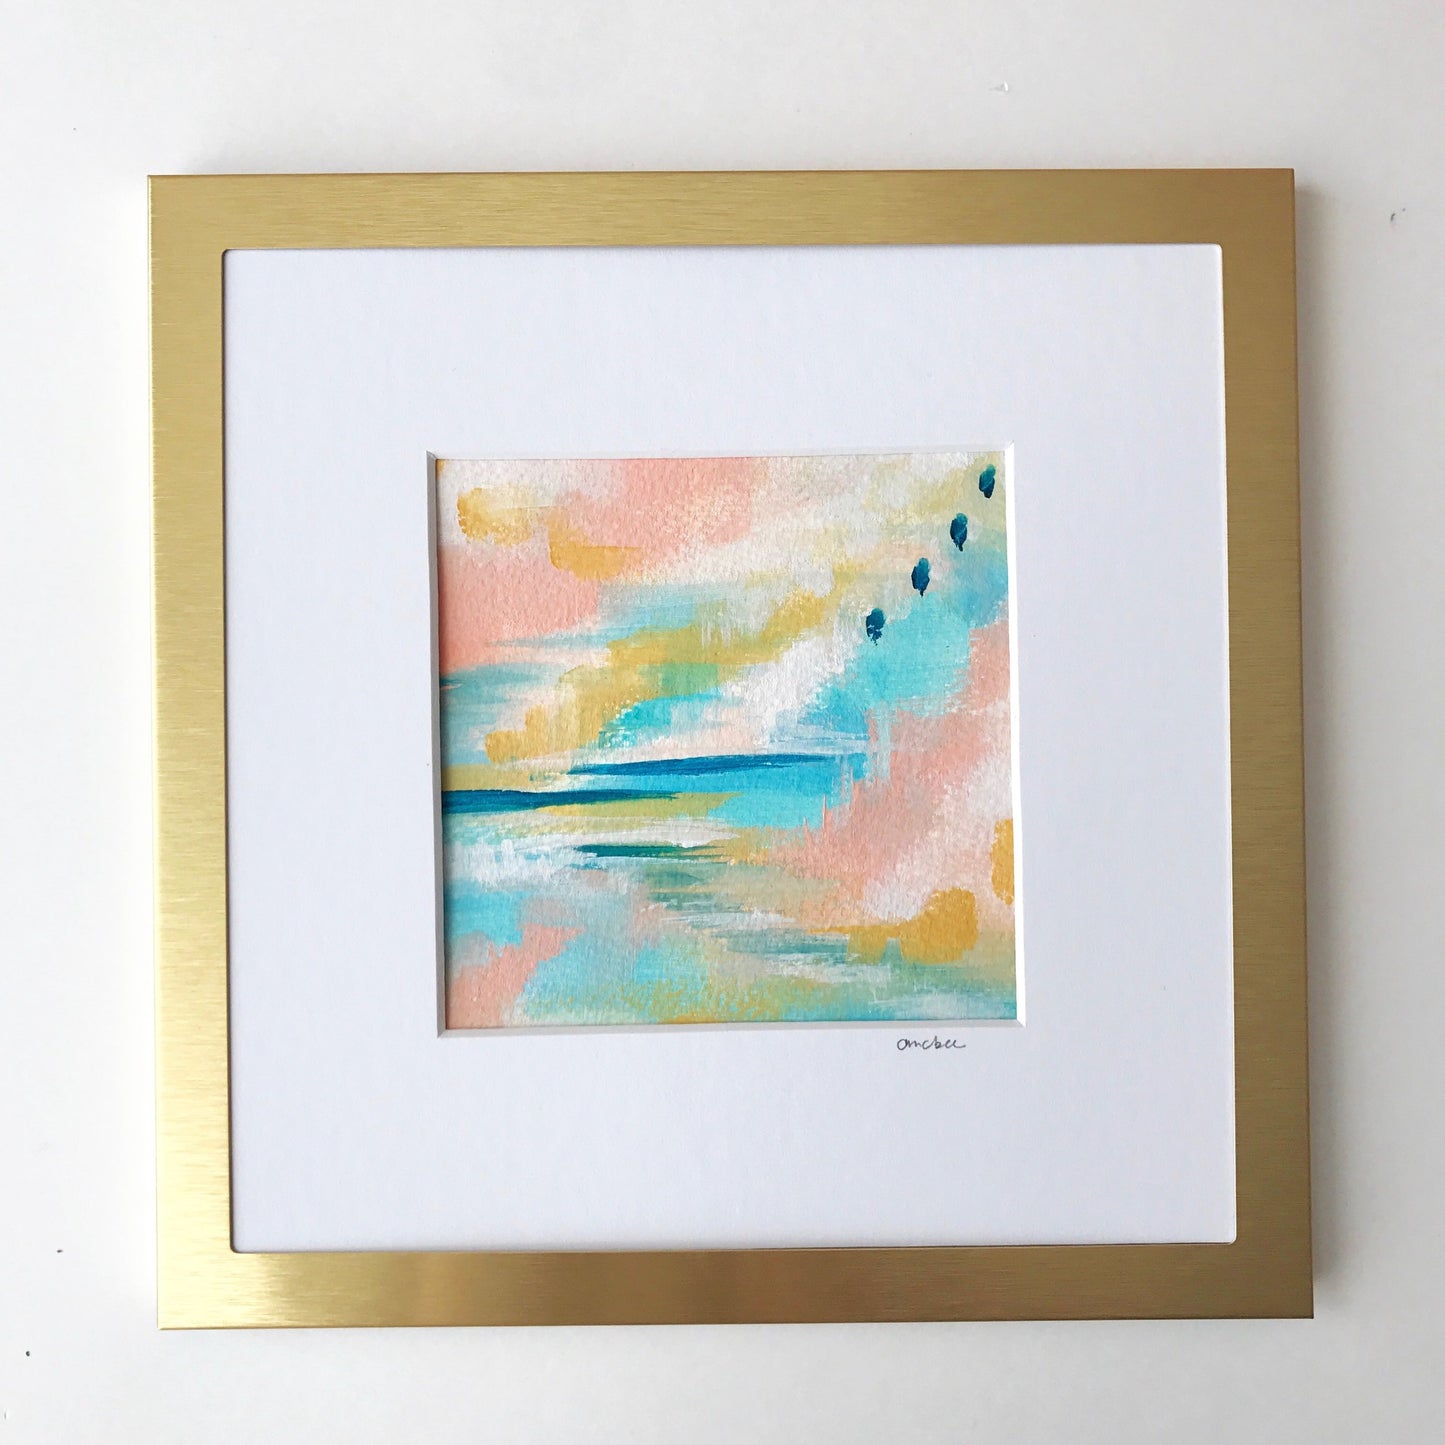 "Maggie" - 5 x 5 Gold Framed Painting